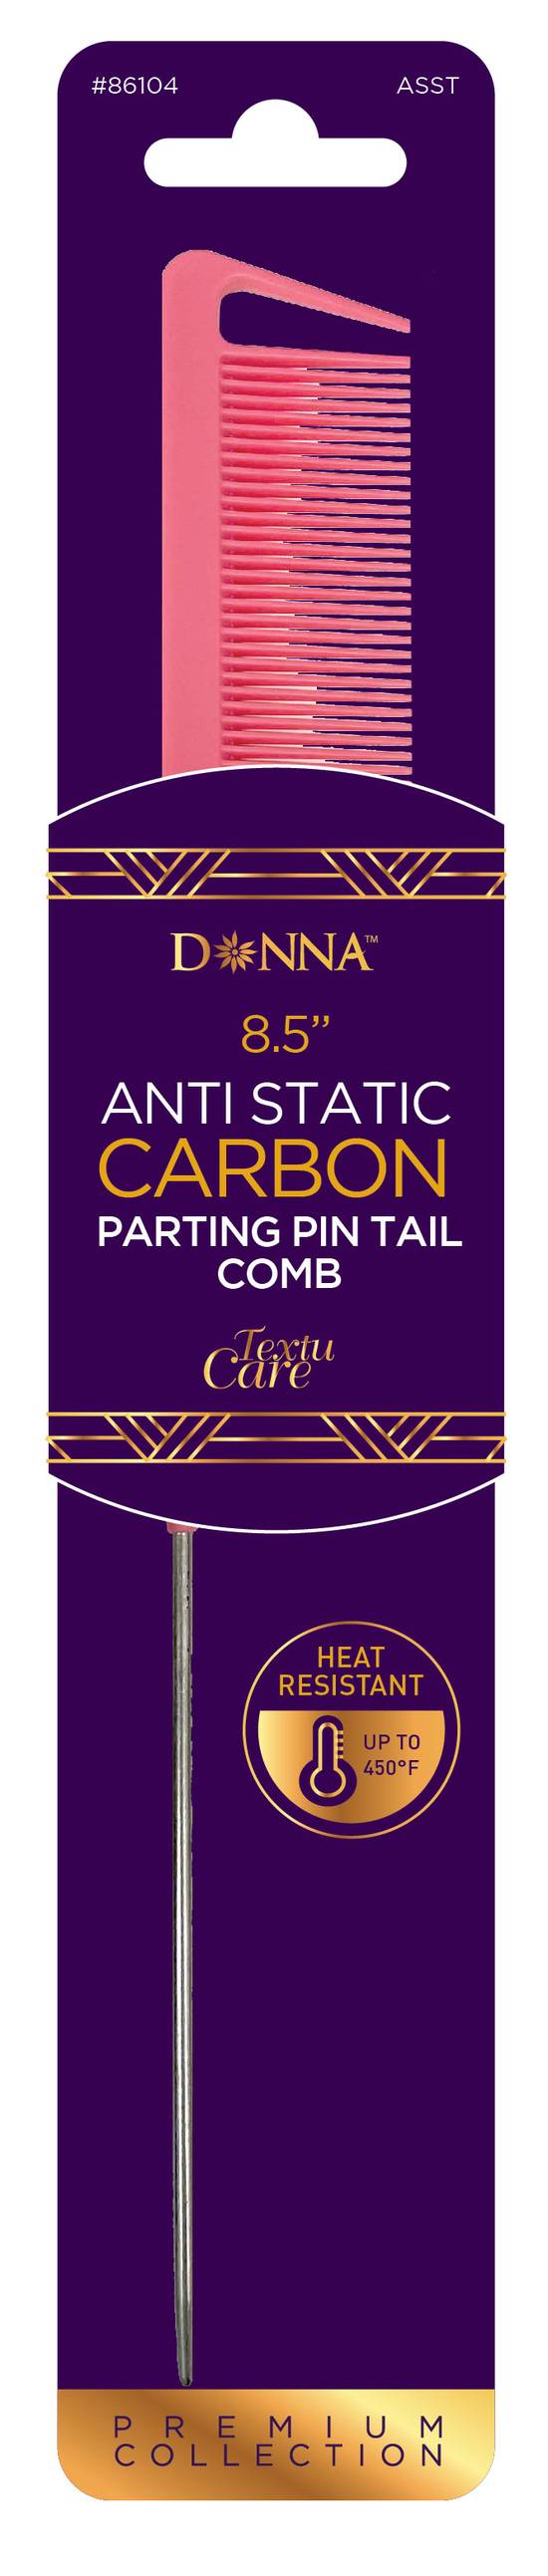 Donna Carbon Parting Pintail Comb